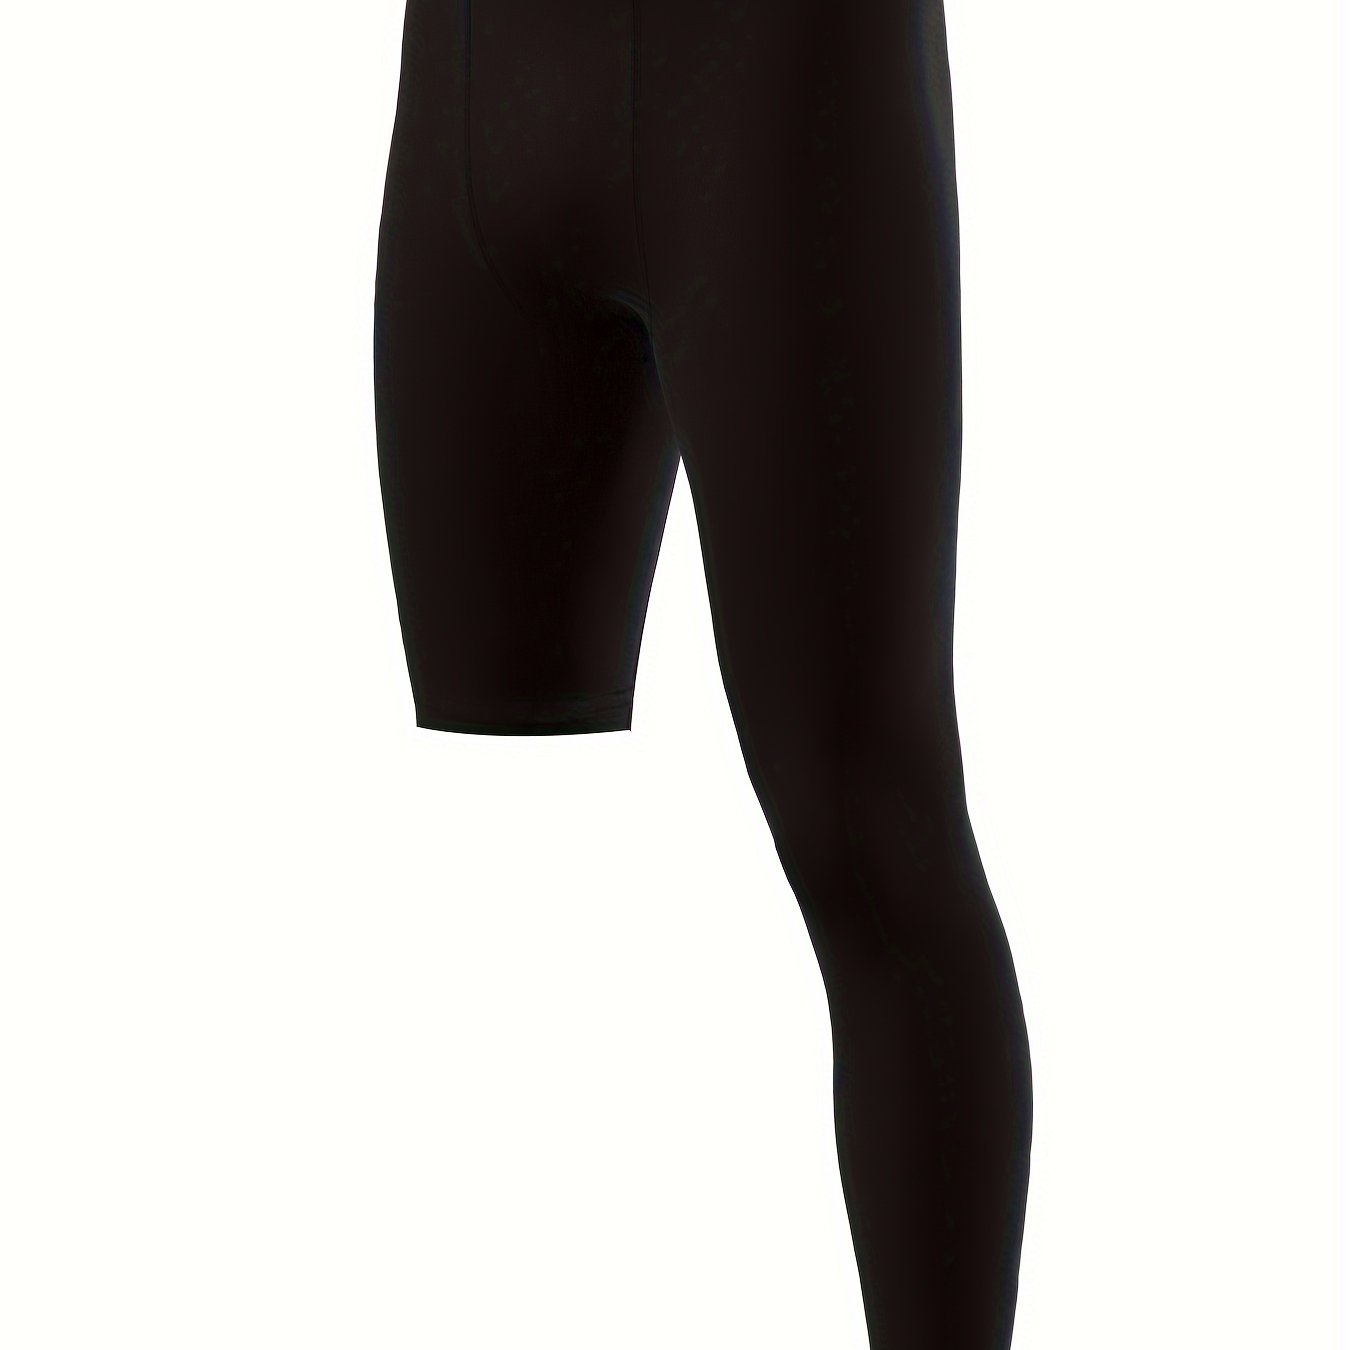 Men's Cropped One Leg Leggings, Active Quick Drying Breathable Sports  Compression Pants For Outdoor Running Training